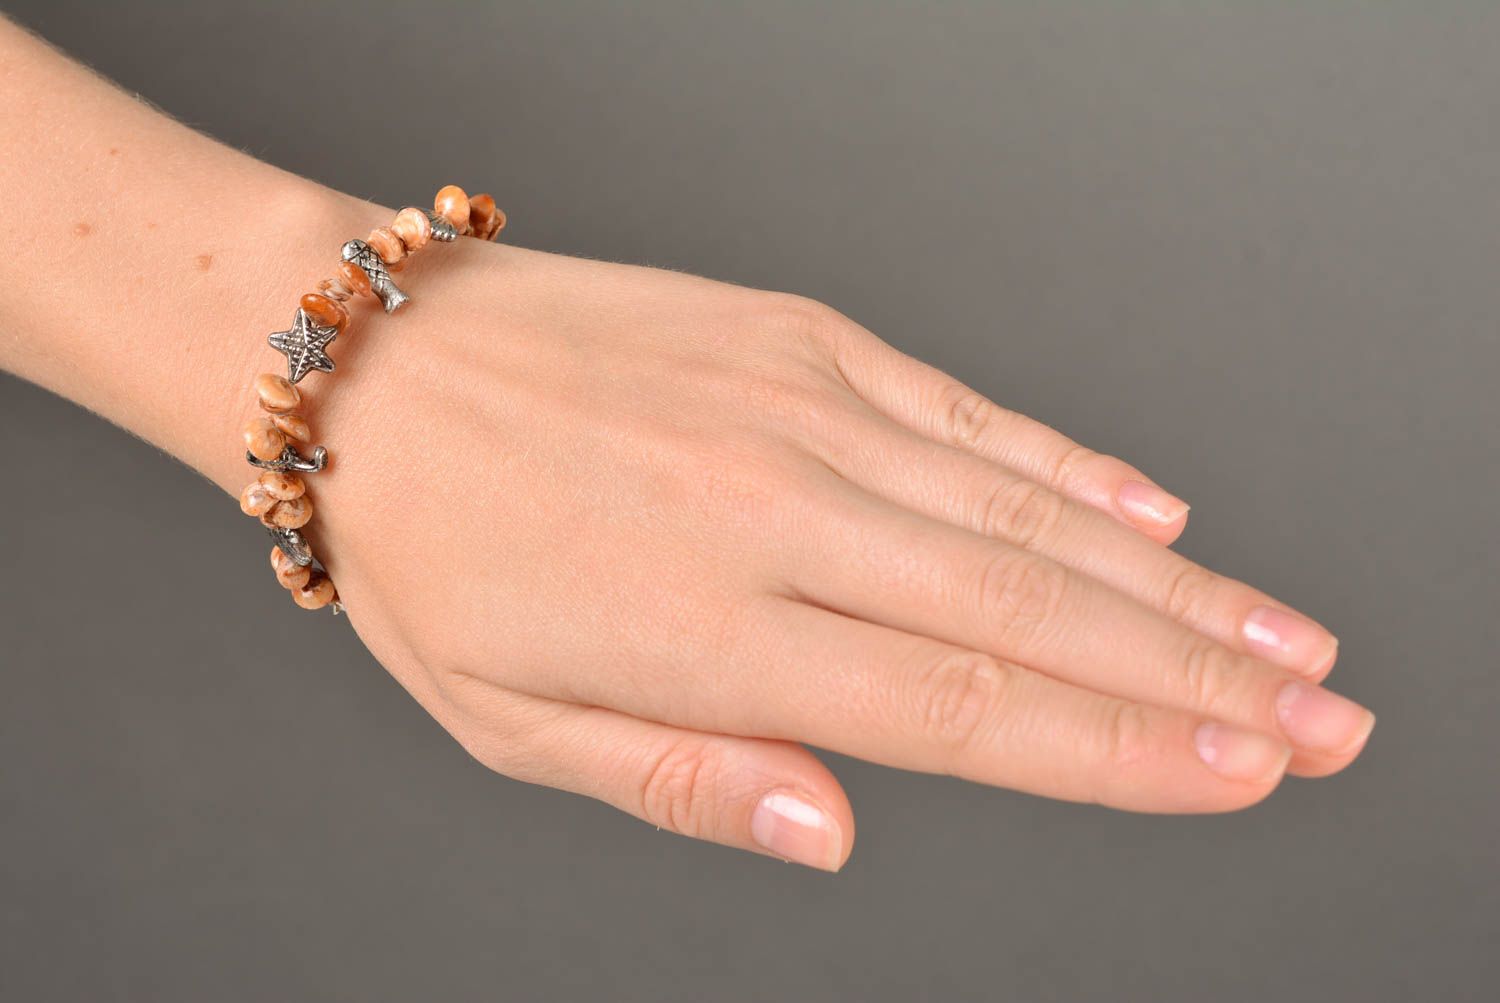 Handmade thin laconic wrist bracelet with seashells and metal charms for women photo 3